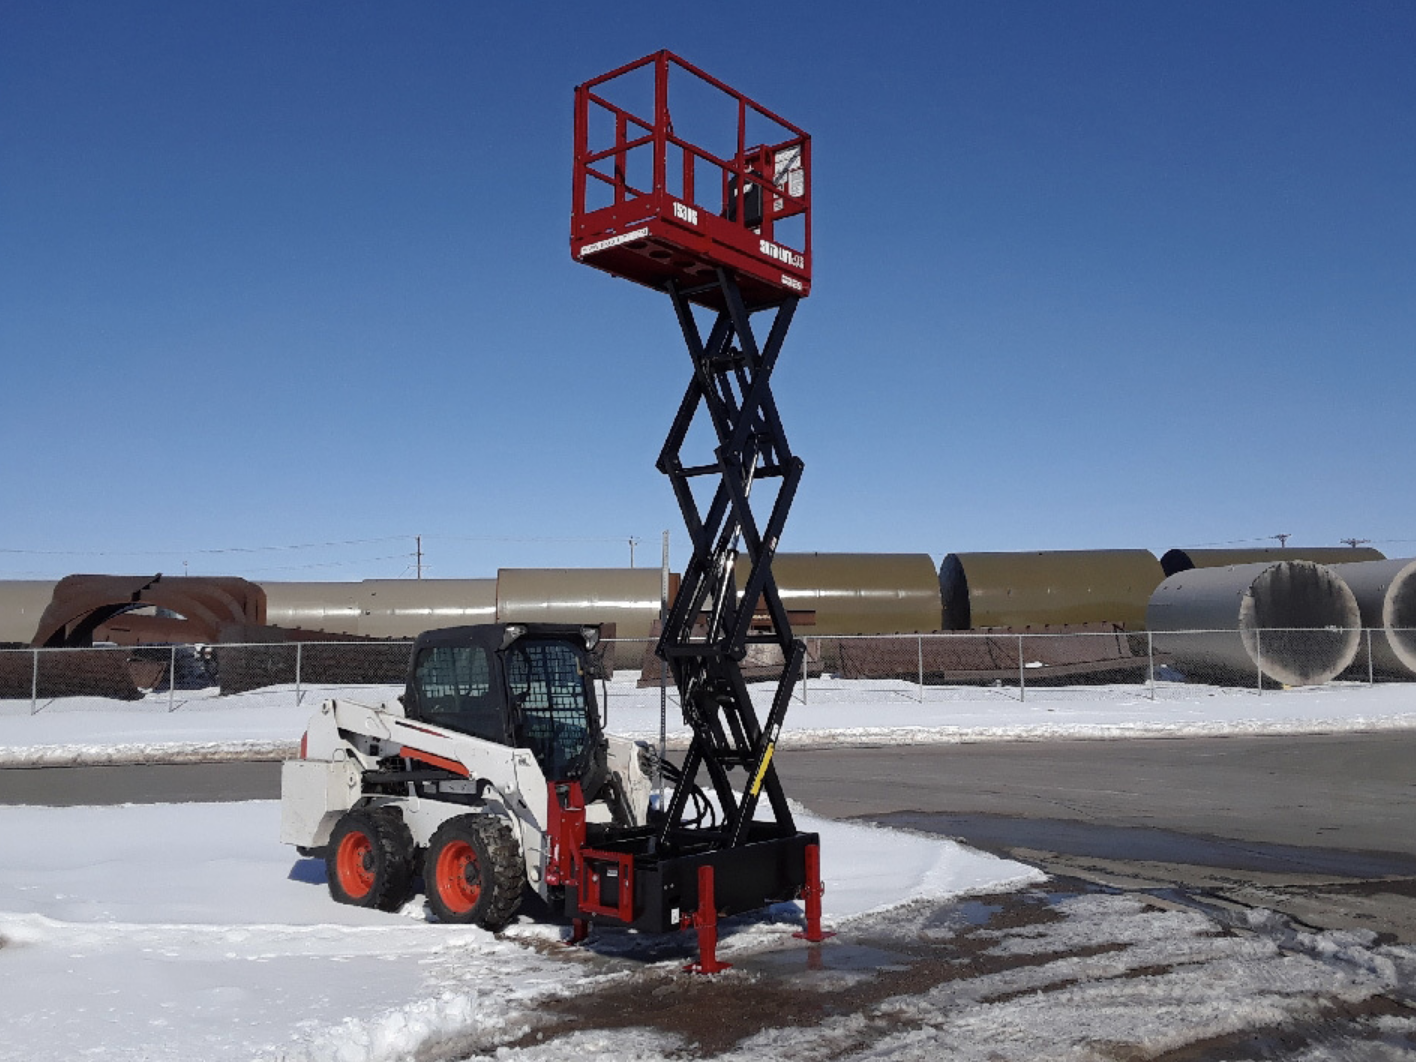 distant view of a skid steer parked at a left angle in a parking lot with a skid steer scissor lift on the front